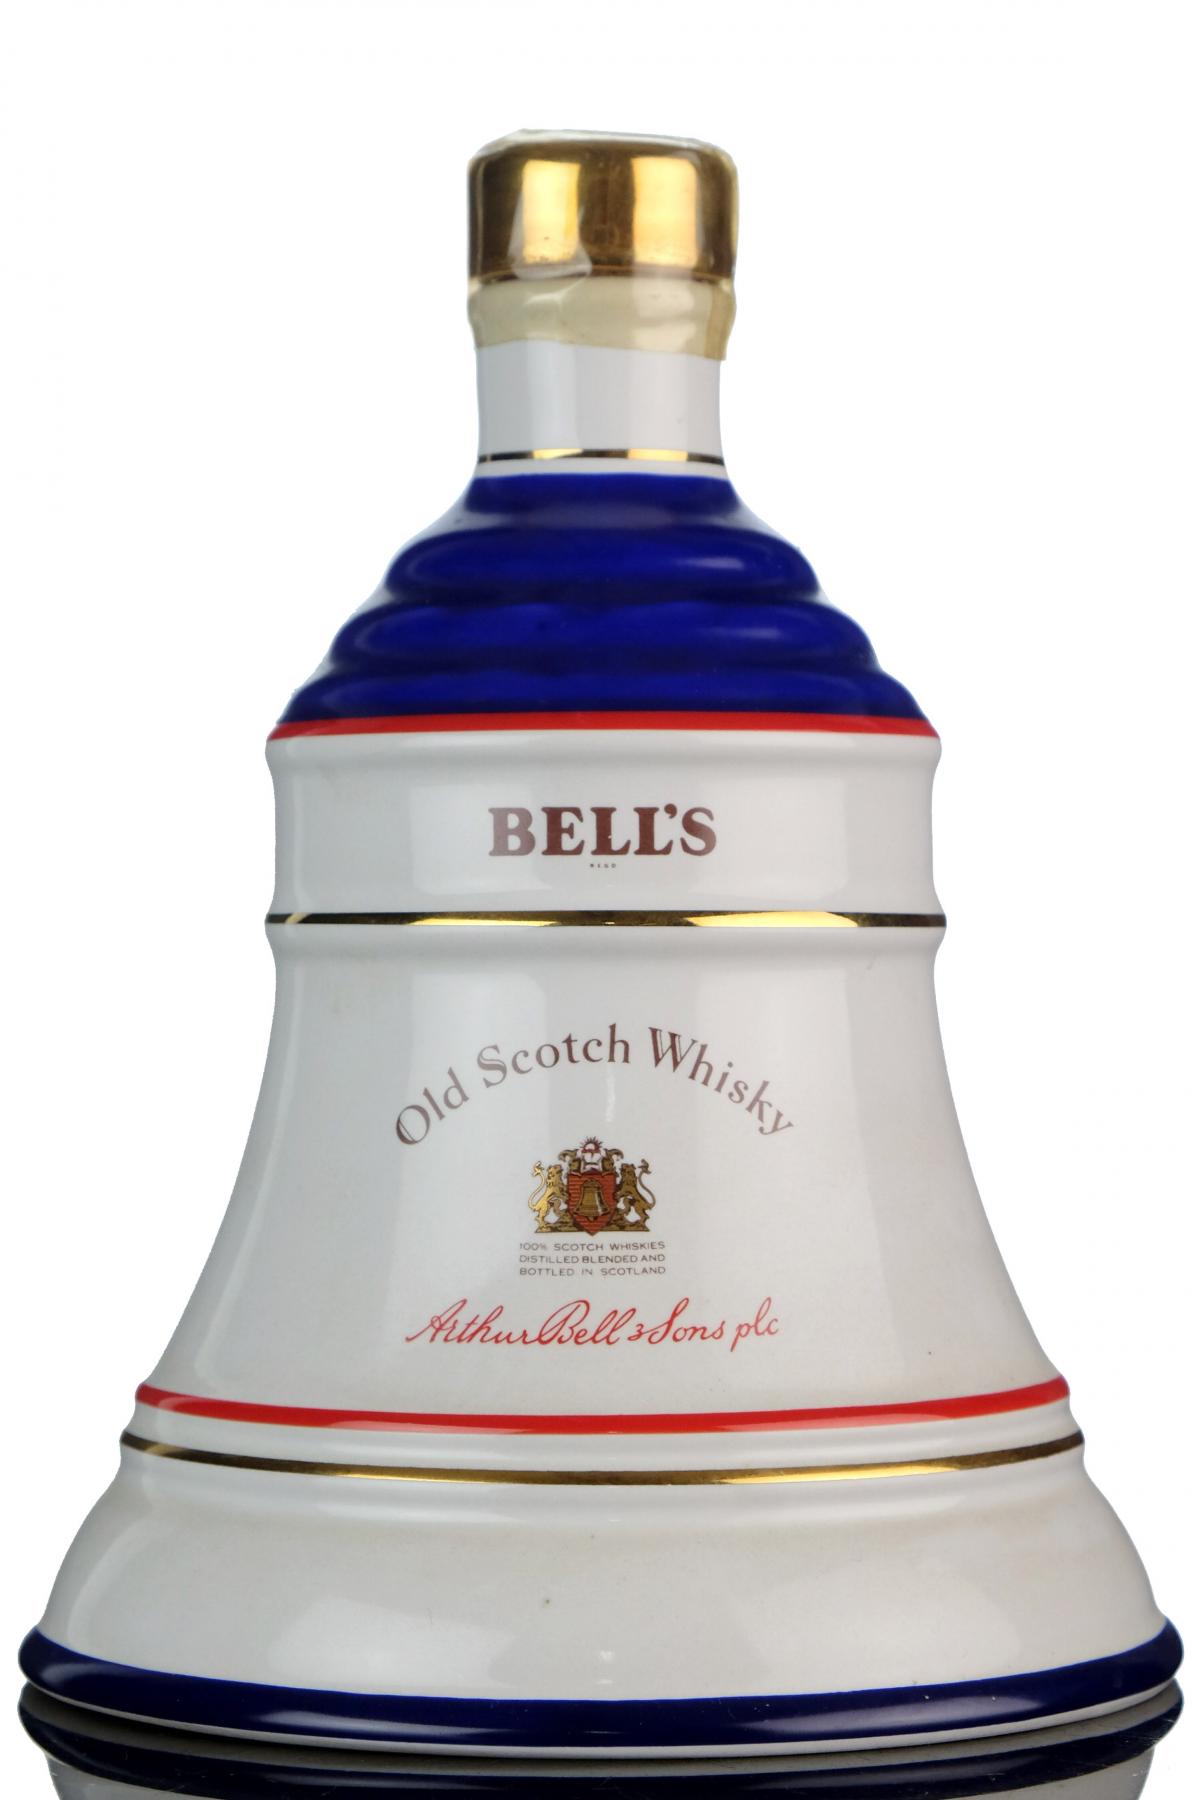 Bells To Commemorate The Birth Of Princess Beatrice 1988